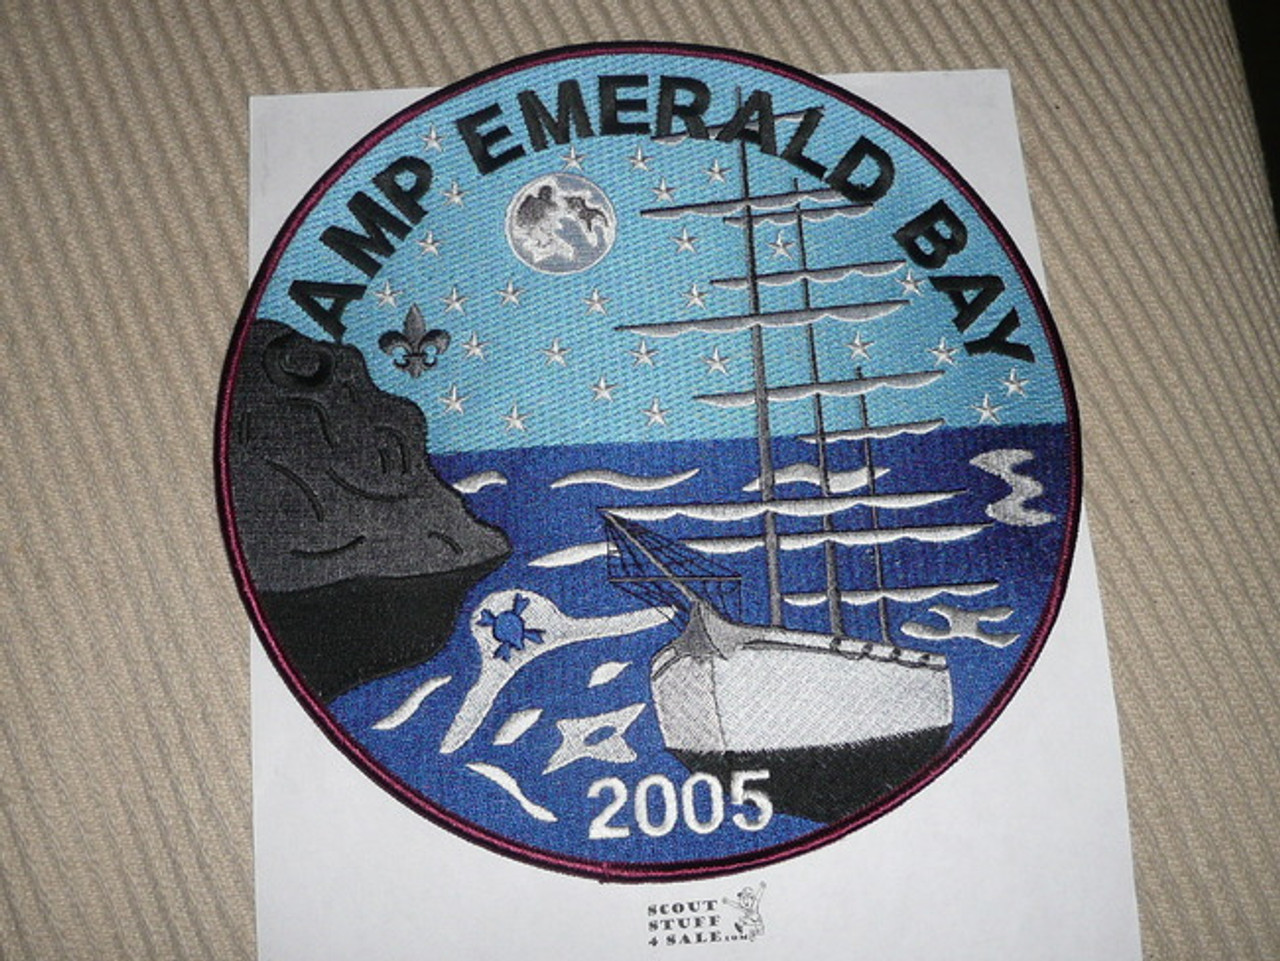 2005 Camp Emerald Bay Large Jacket Patch